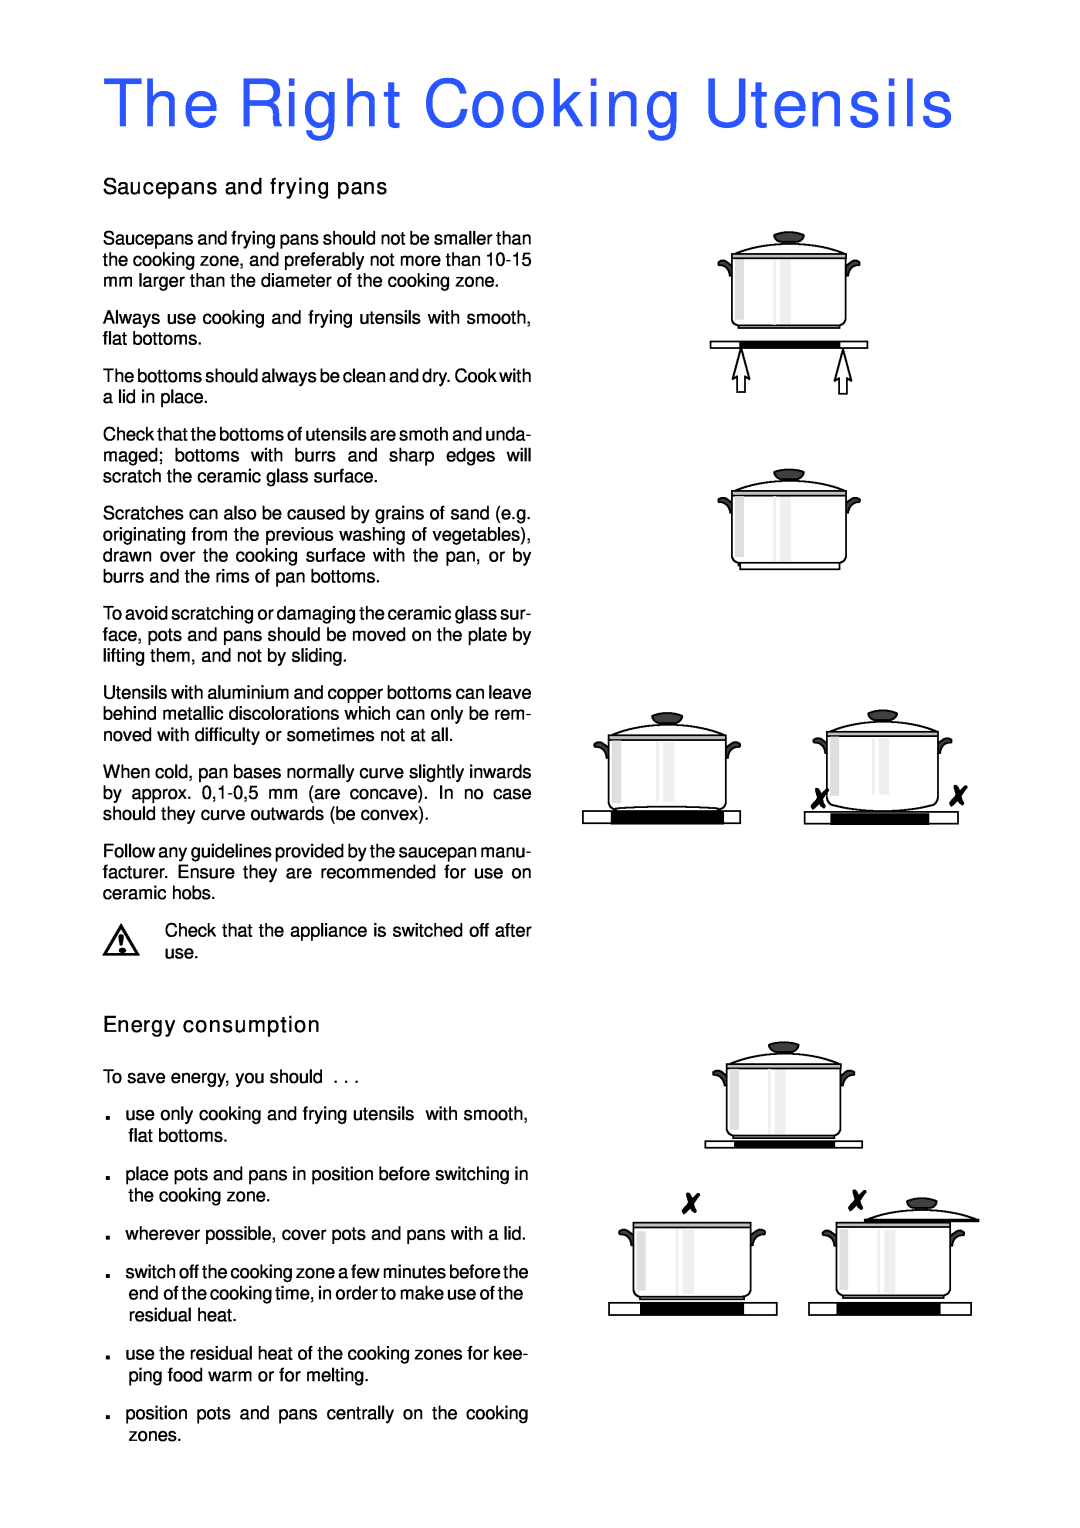 Tricity Bendix TBC 650 BL manual The Right Cooking Utensils, Saucepans and frying pans, Energy consumption 